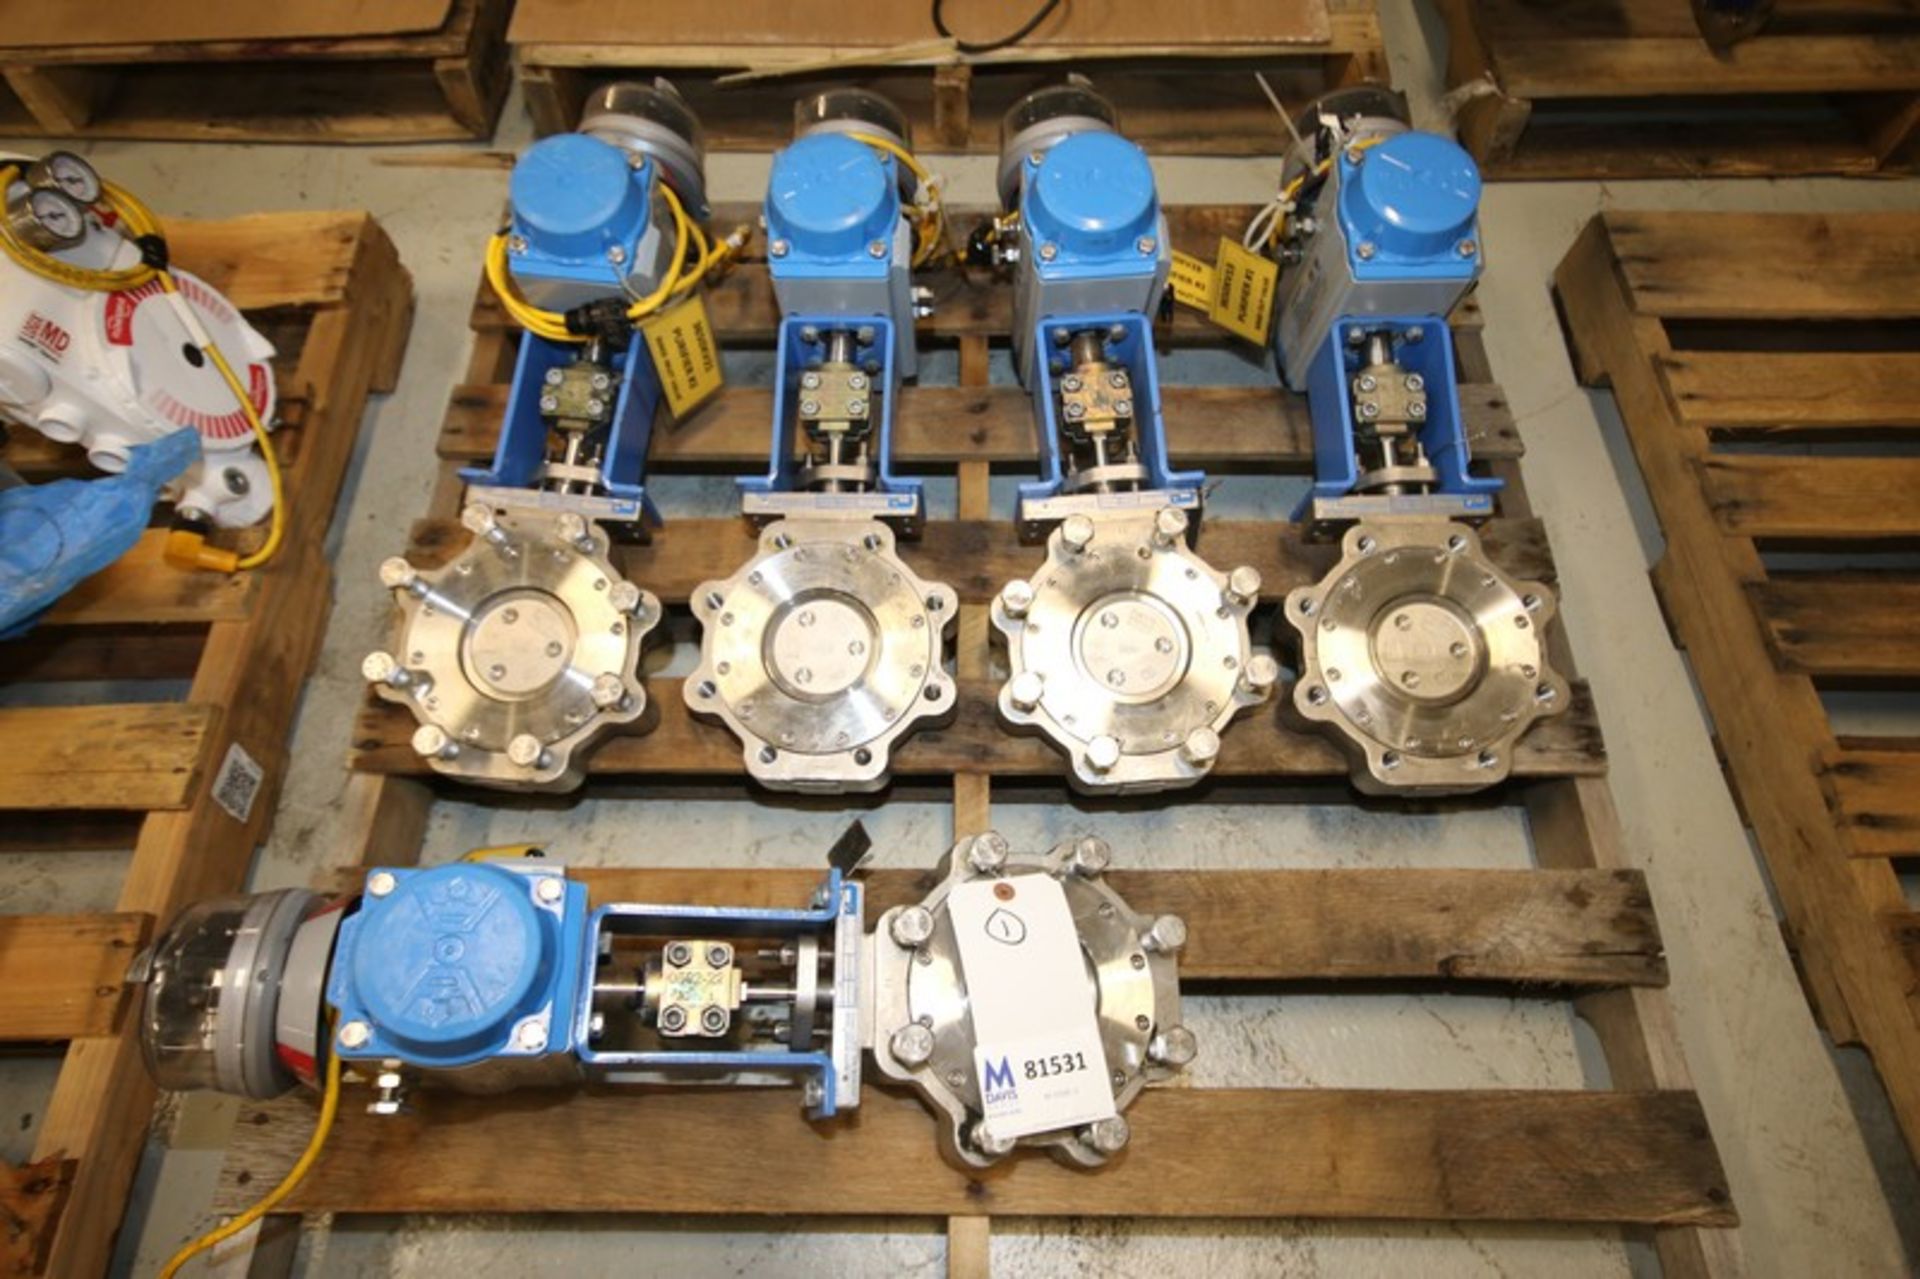 Lot of (5) Jamesbury 4" S/S Pneumatic Butterfly Valves, Flanged Type (INV#81531)(Located @ the MDG